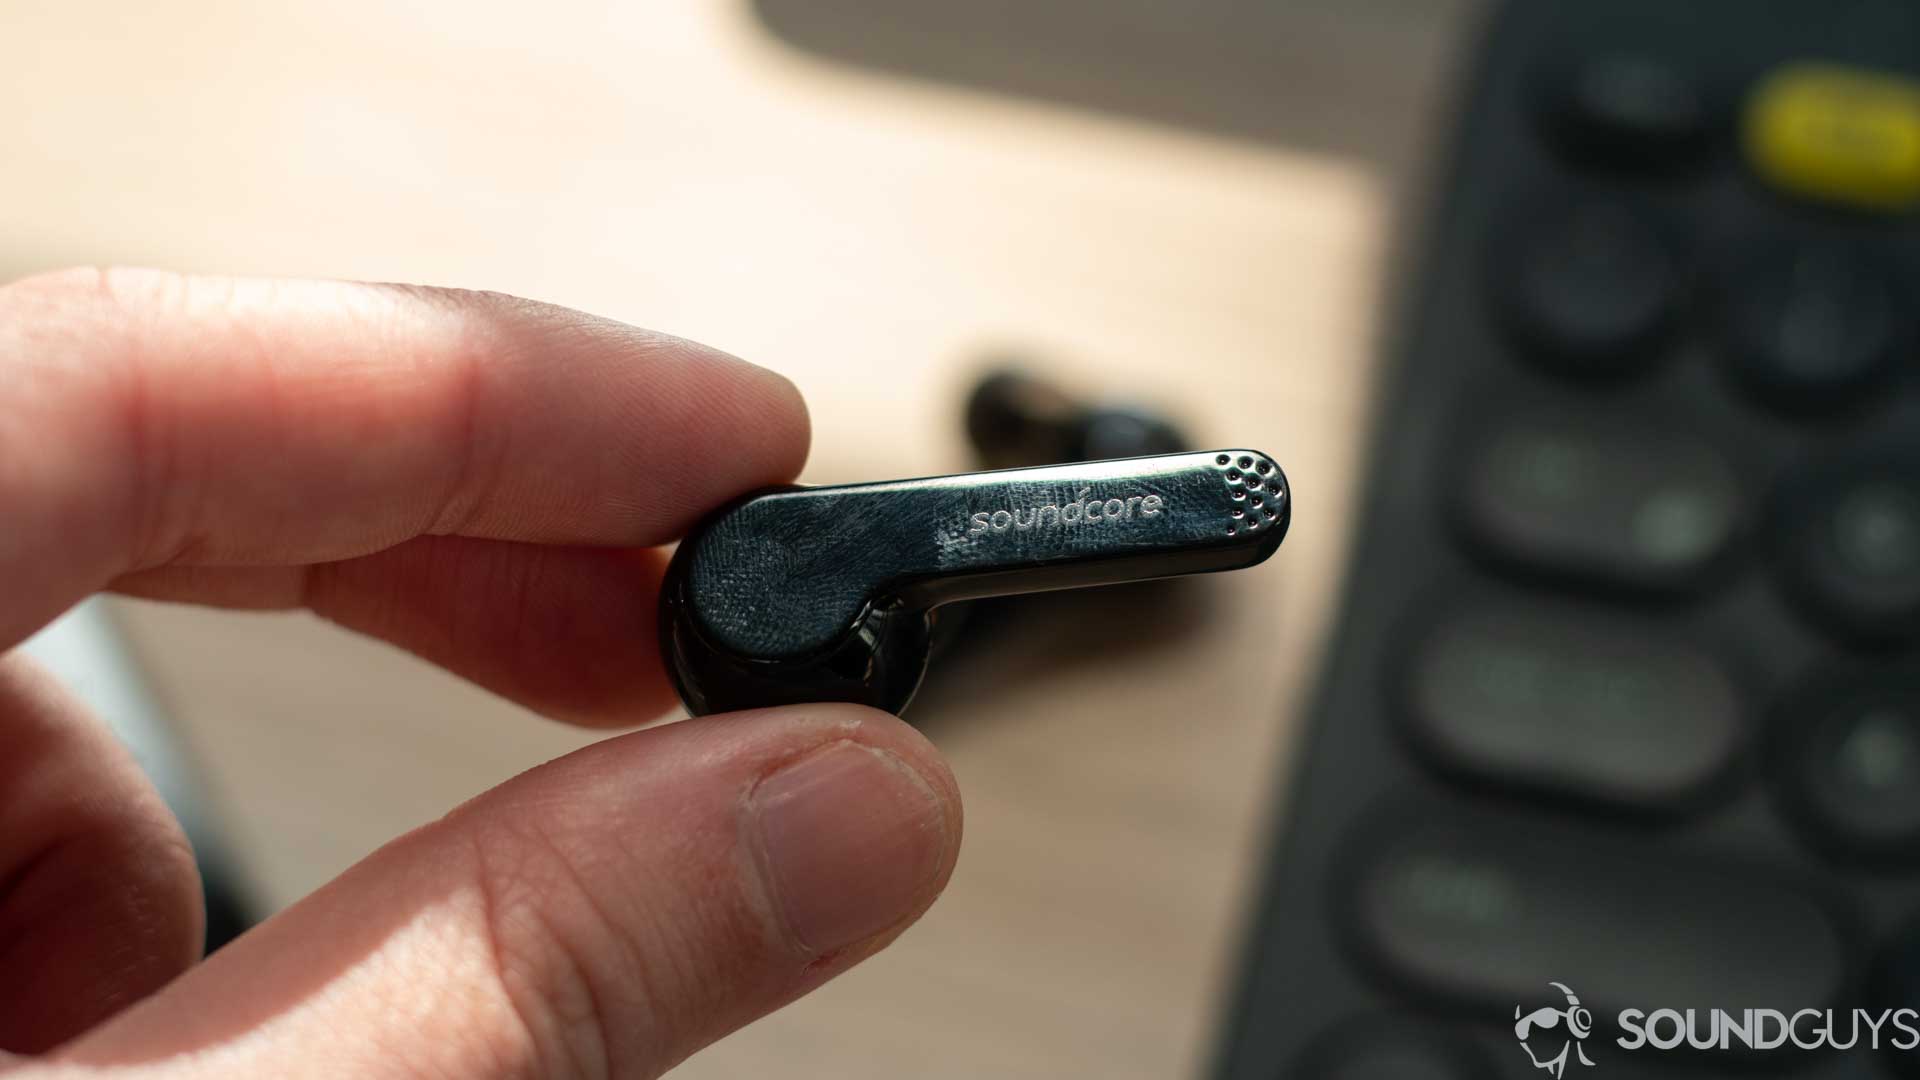 Picture of the Anker Soundcore Liberty Air earbud in hand with the Soundcore logo on the stem and the microphones visible. 